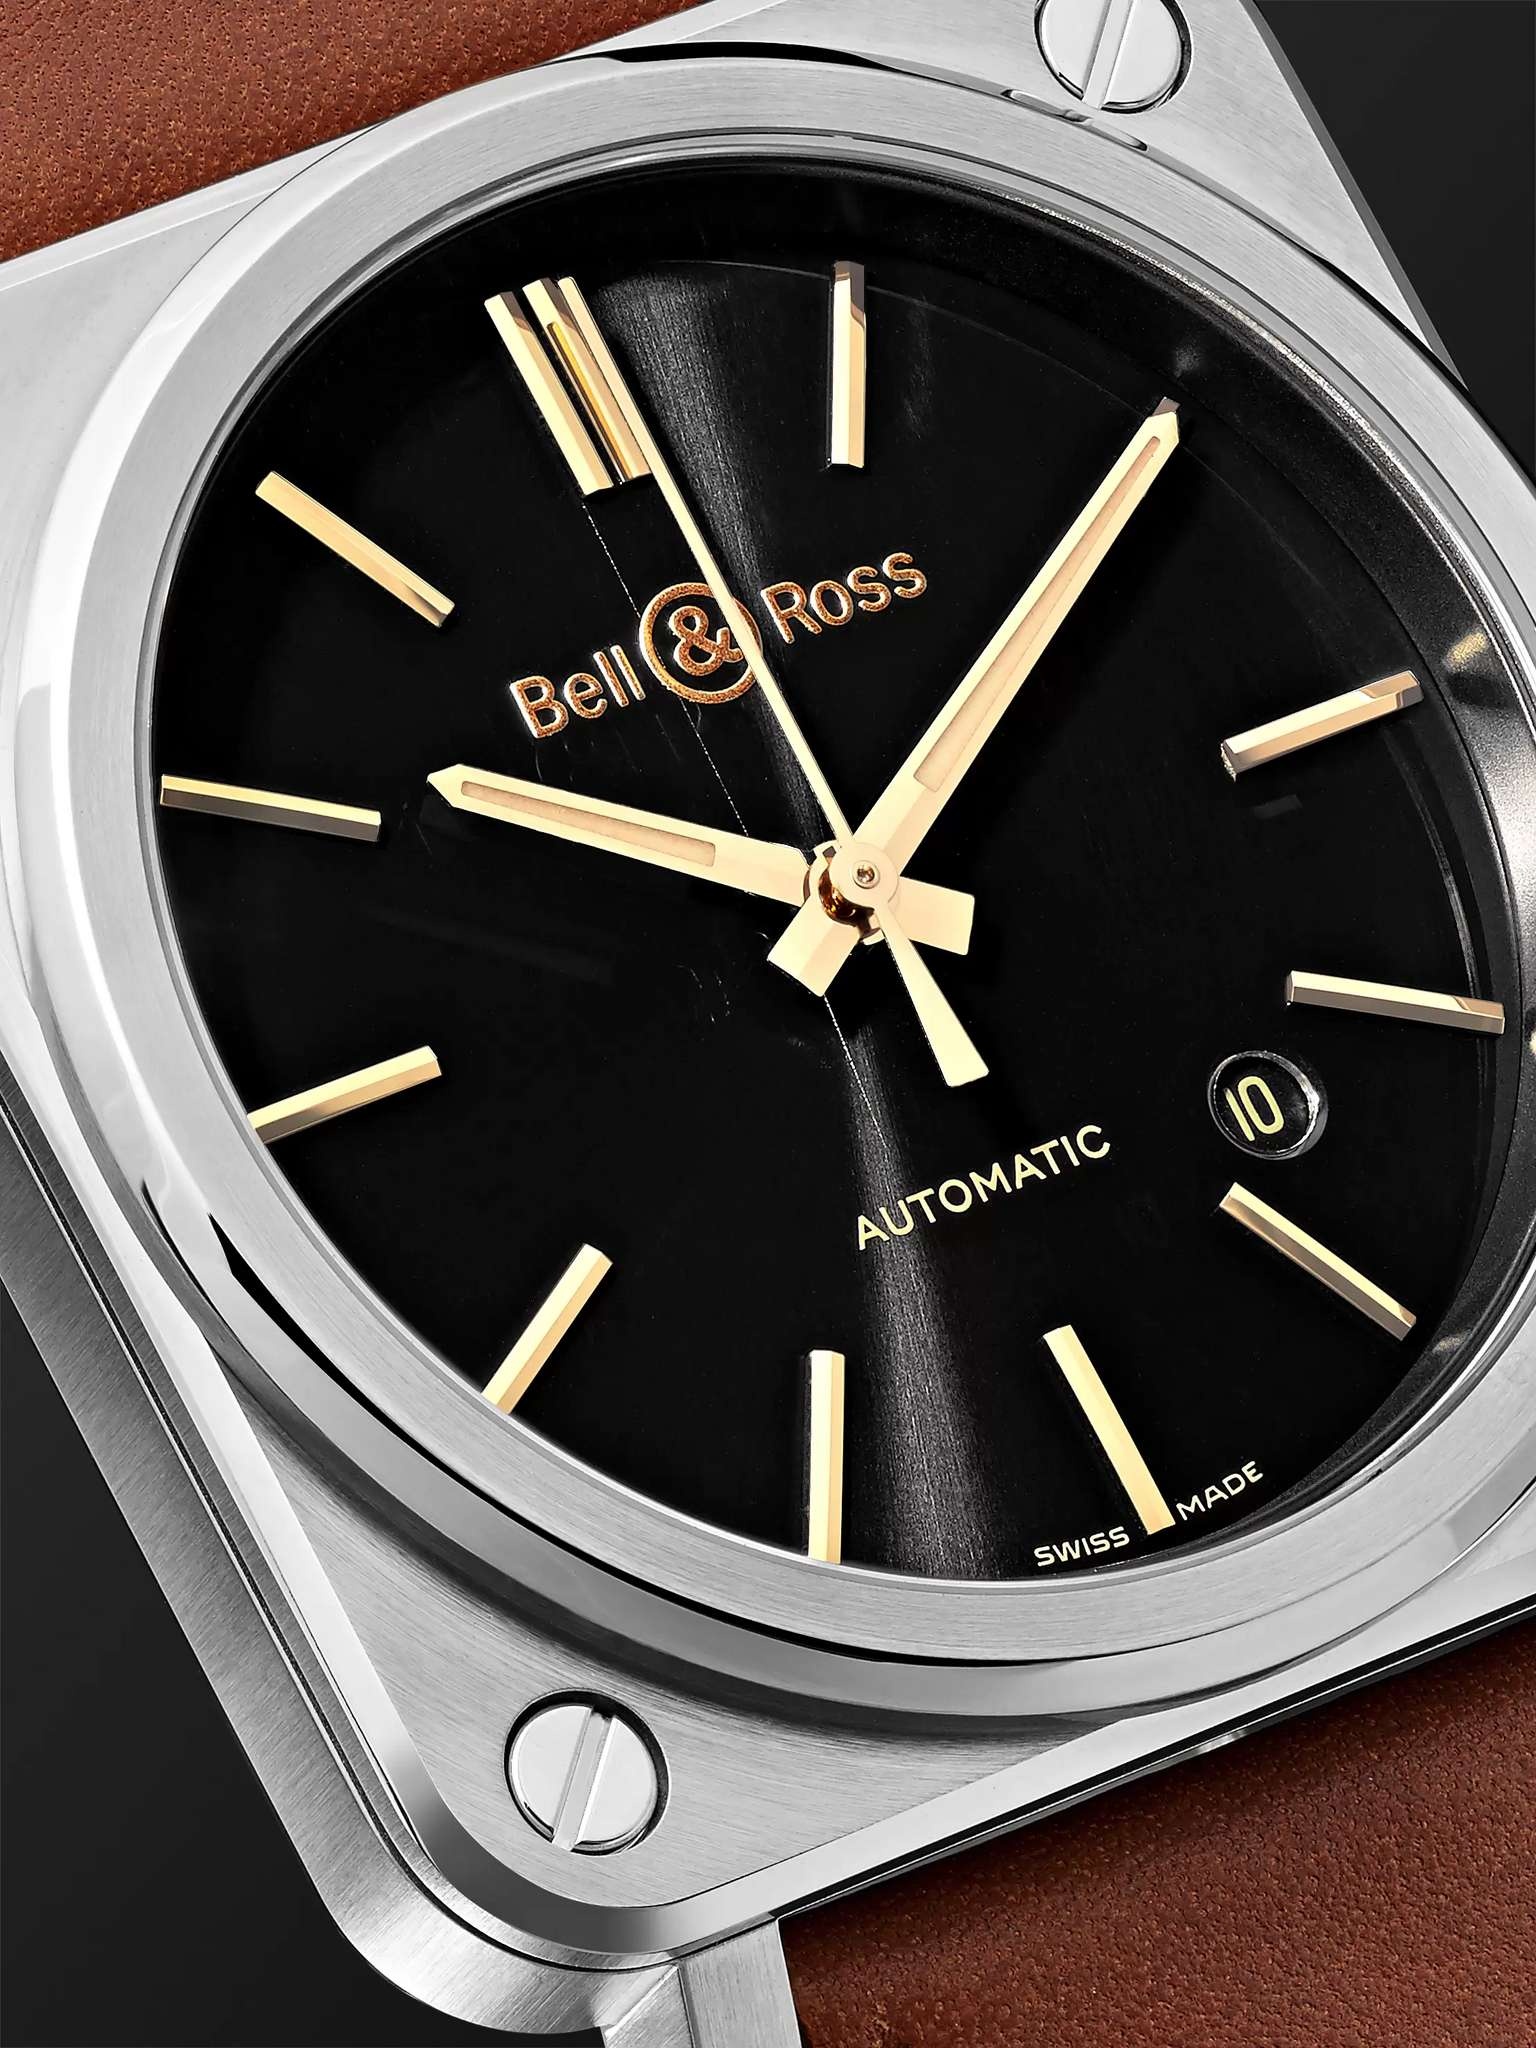 BR S-92 Golden Heritage Automatic 39mm Stainless Steel and Leather Watch, Ref. No. BRS92-ST-G-HE/SCA - 6